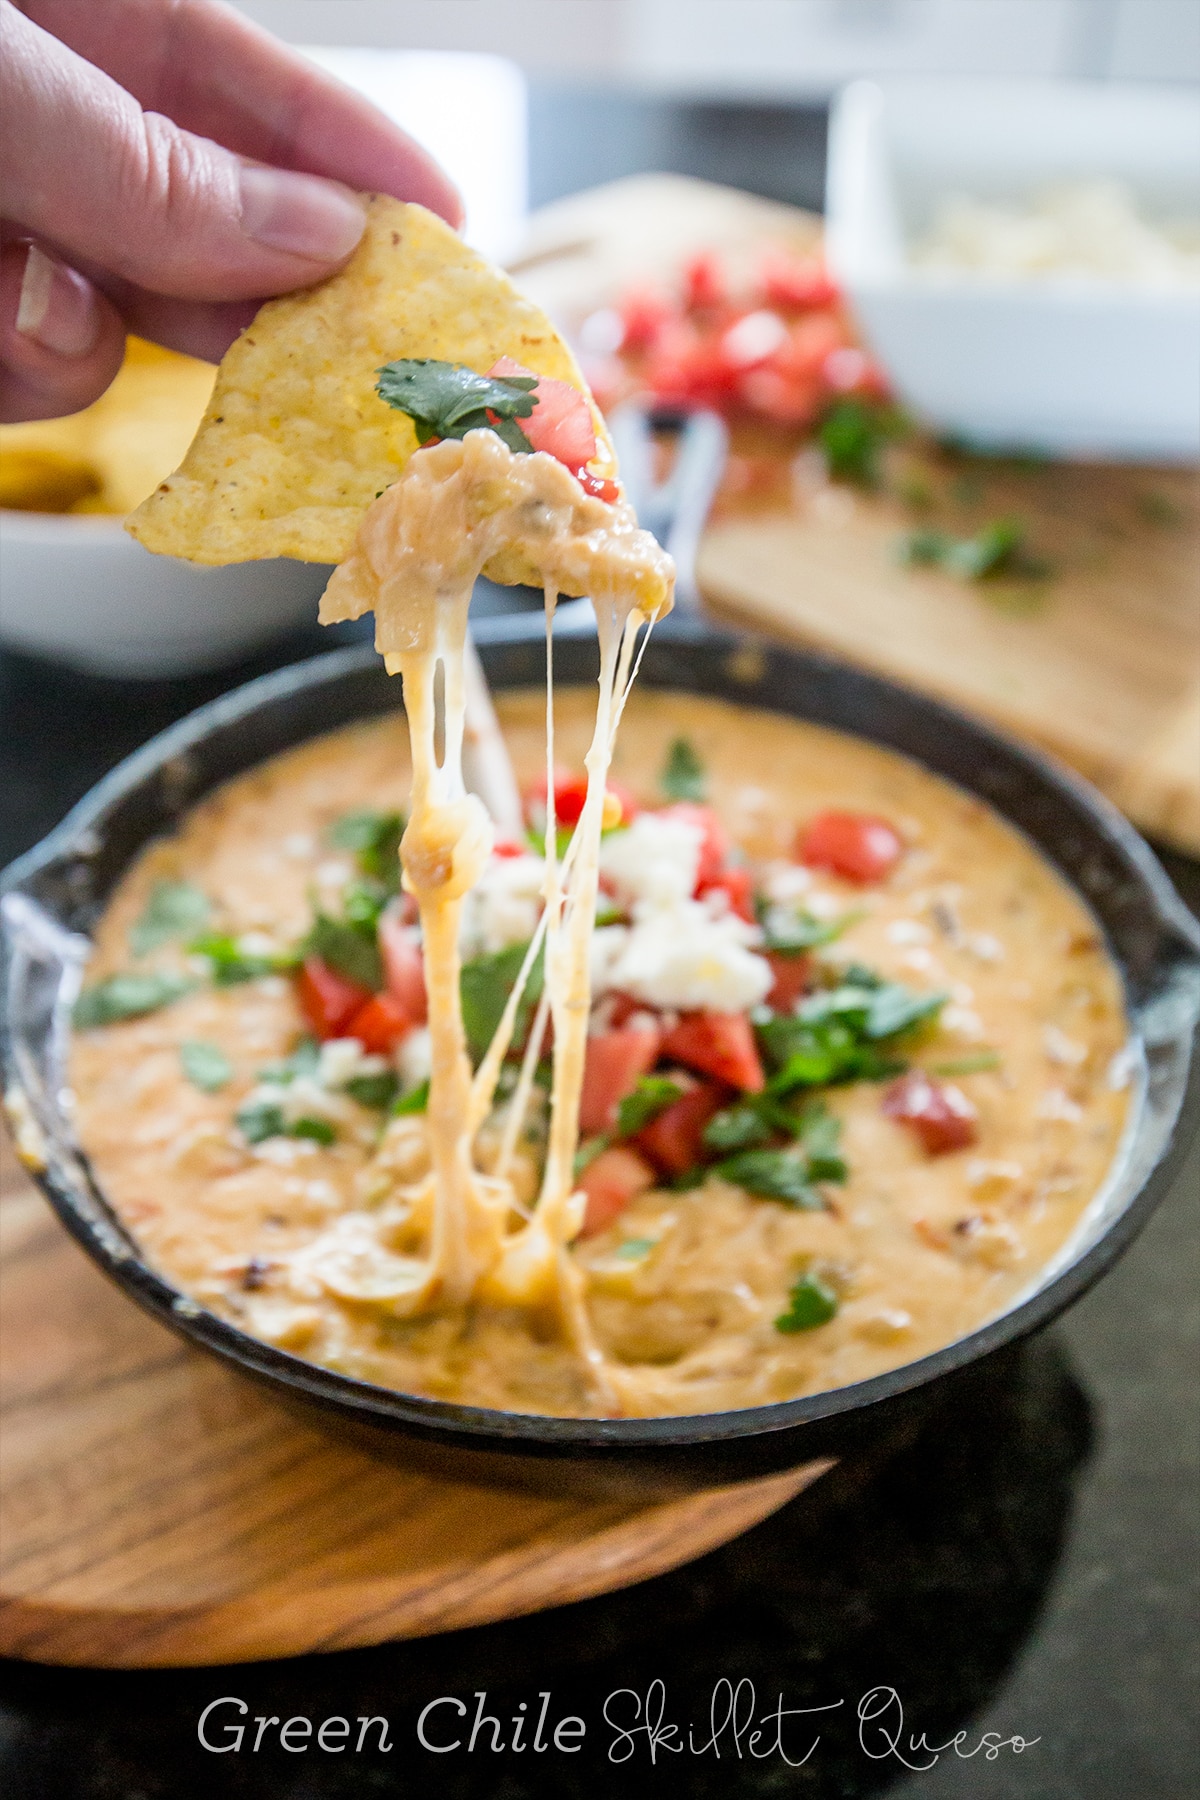 This is the most delicious homemade queso ever!